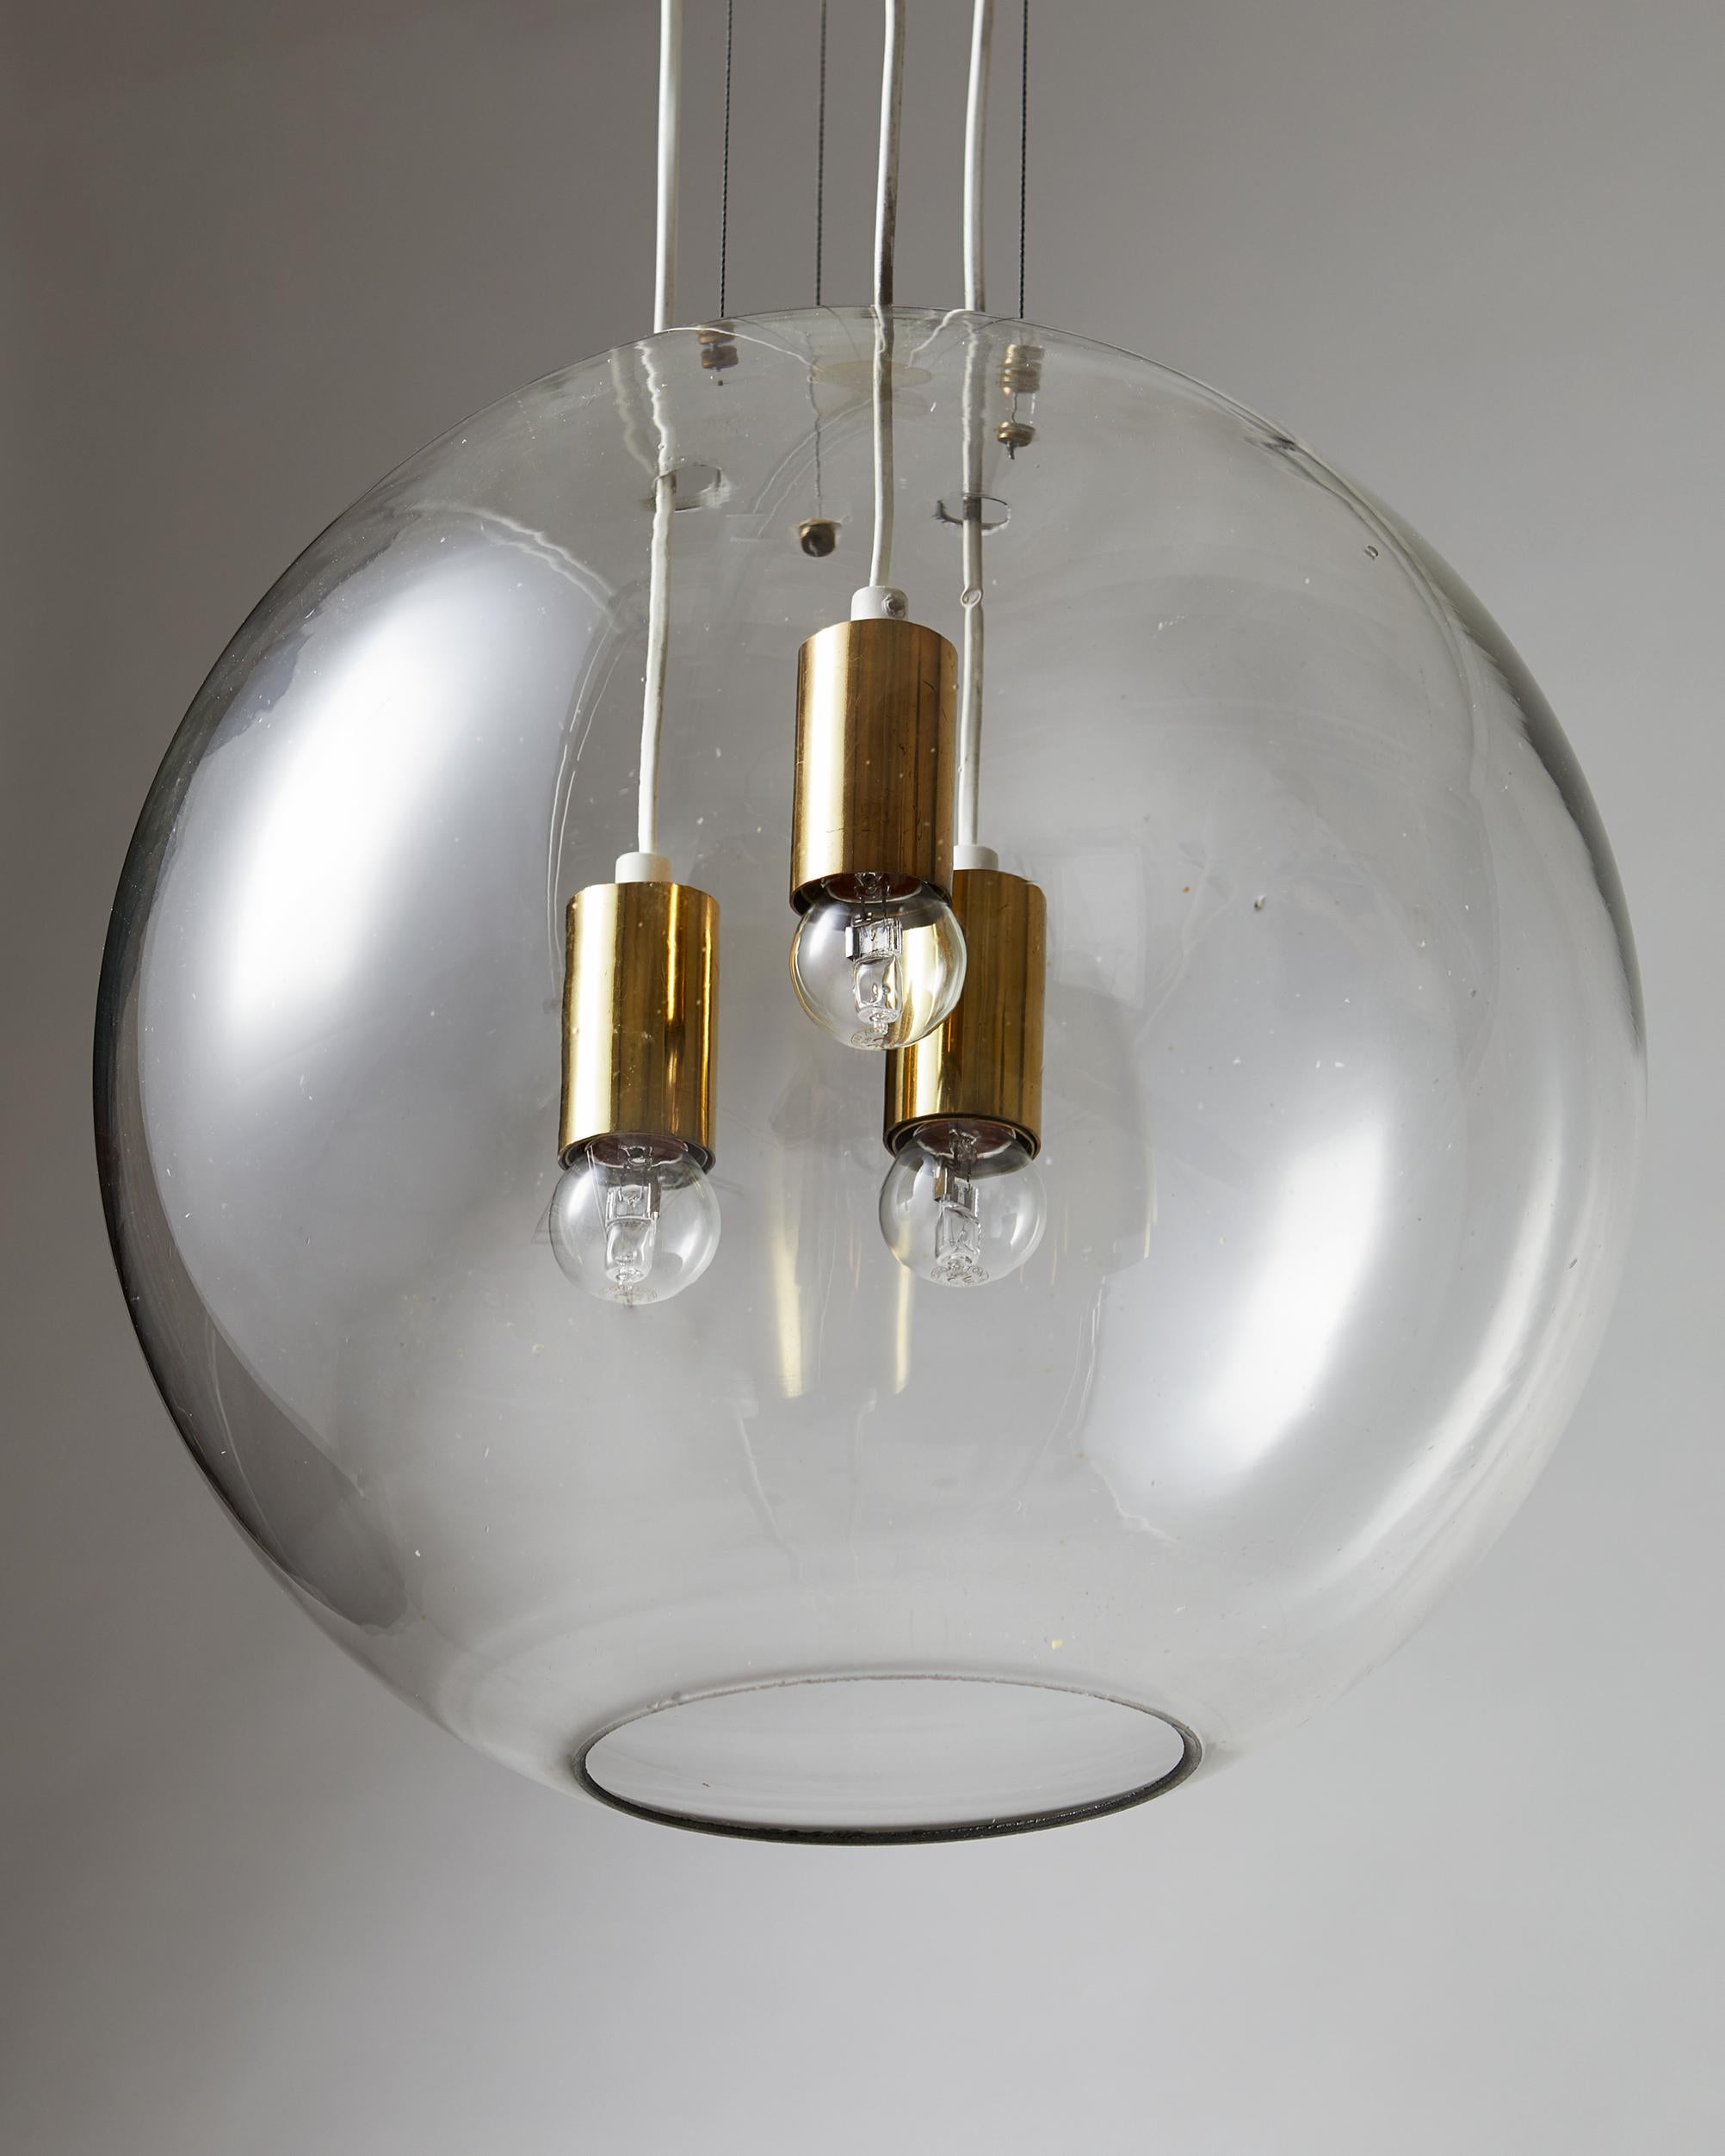 Swedish Ceiling Lamp, Designed by AOS 'Ahlgren, Olsson and Silow' for Axel Anell